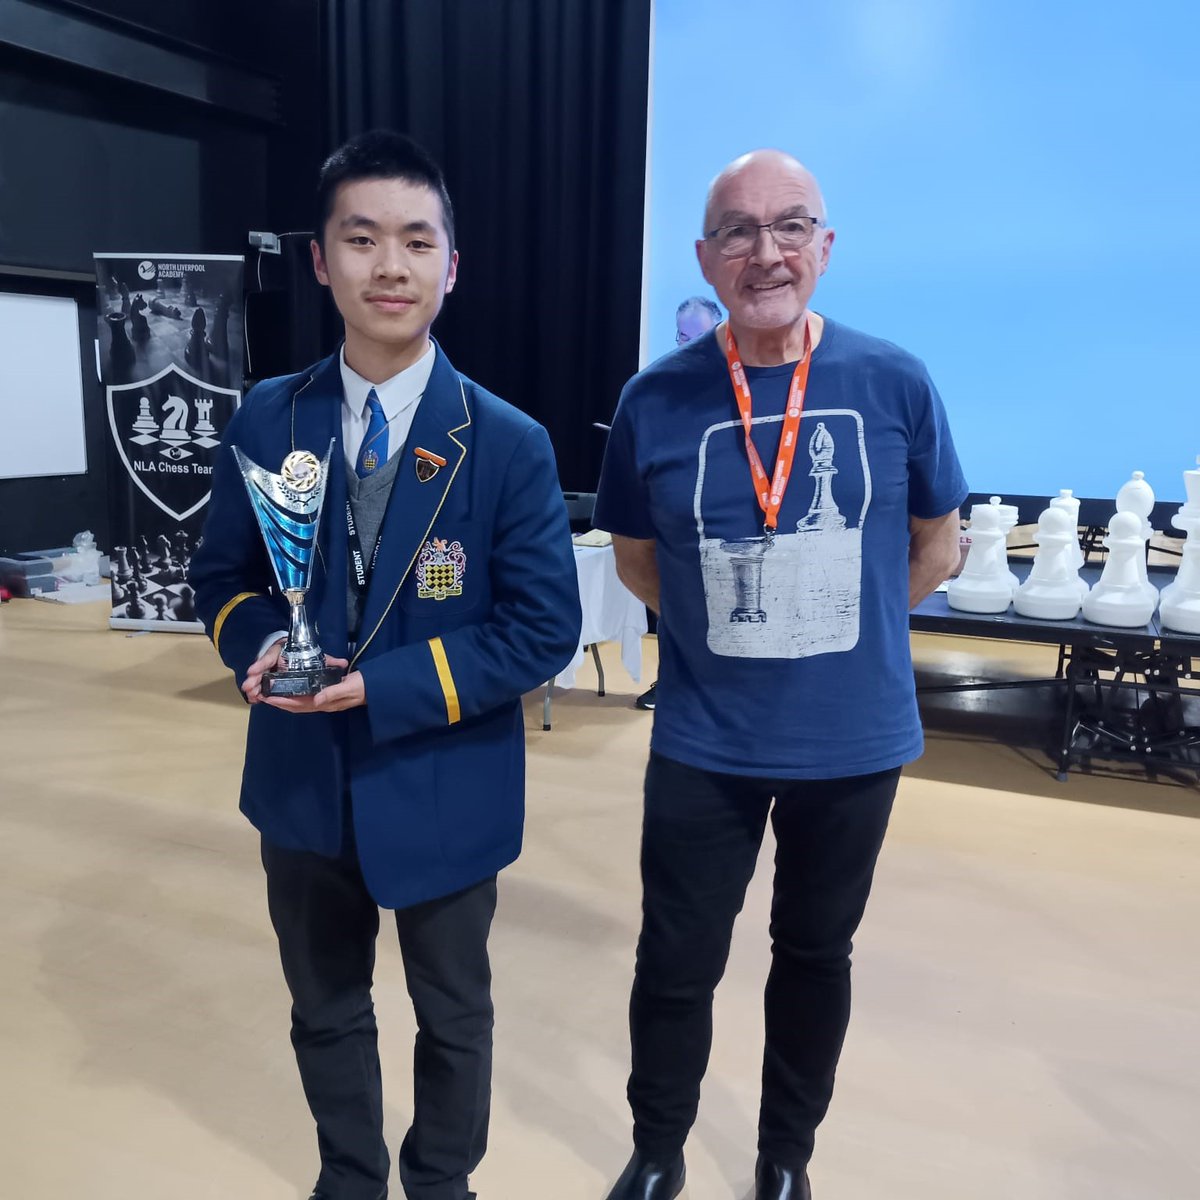 Last week 2 teams entered the Merseyside Chess tournament at North Liverpool Academy.20 teams battled across the chess boards for 5 gruelling rounds in a rapid time format. 'A' team came 2nd, qualifying for the National Finals.Congratulations and good luck for the next round!♟️⭐️